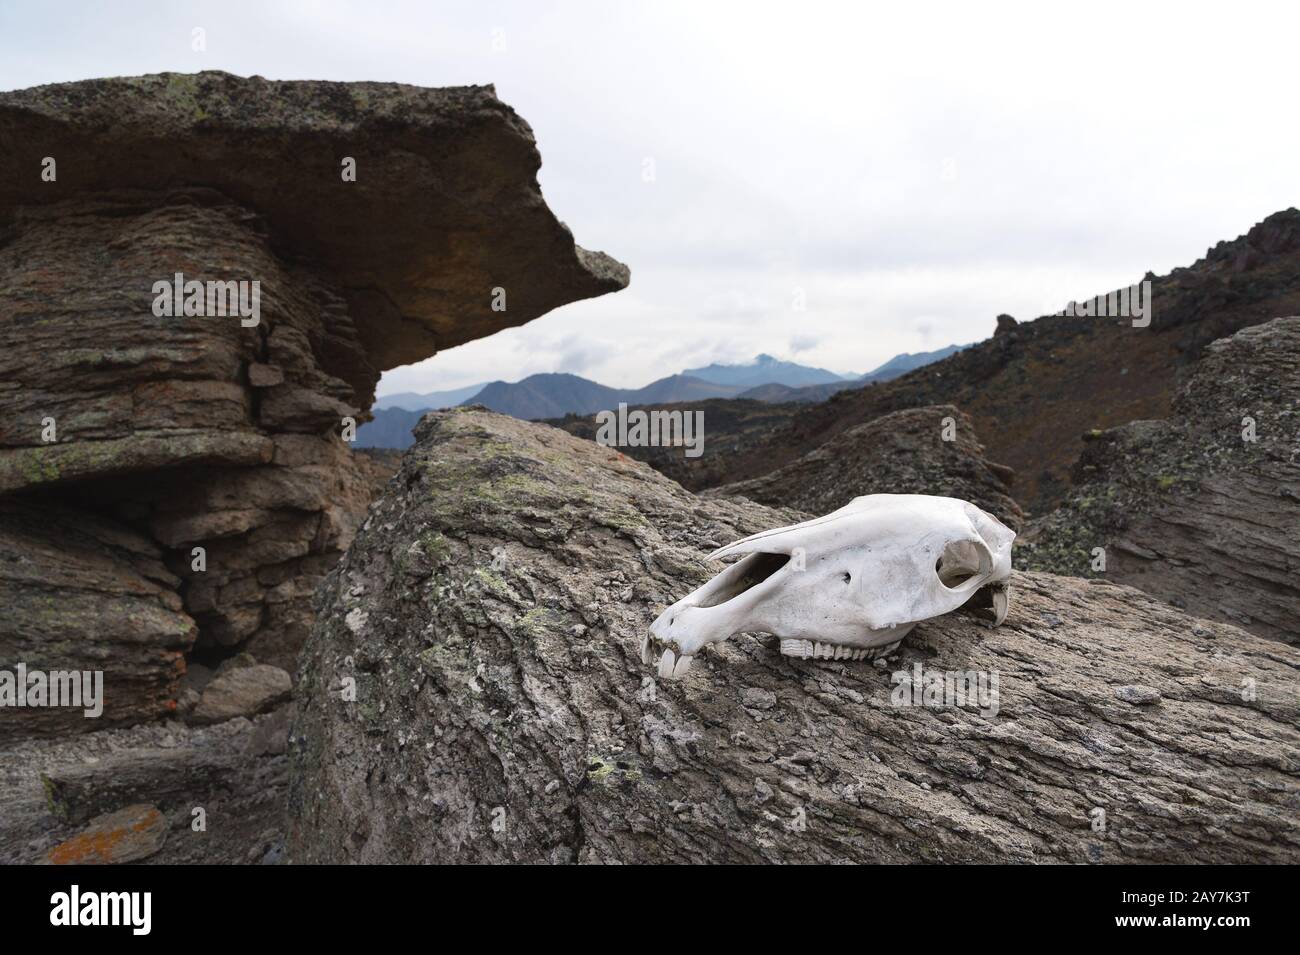 The skull of a cow lies on a stone fungus at an altitude of 3200 meters of Mount Elbrus. Stock Photo